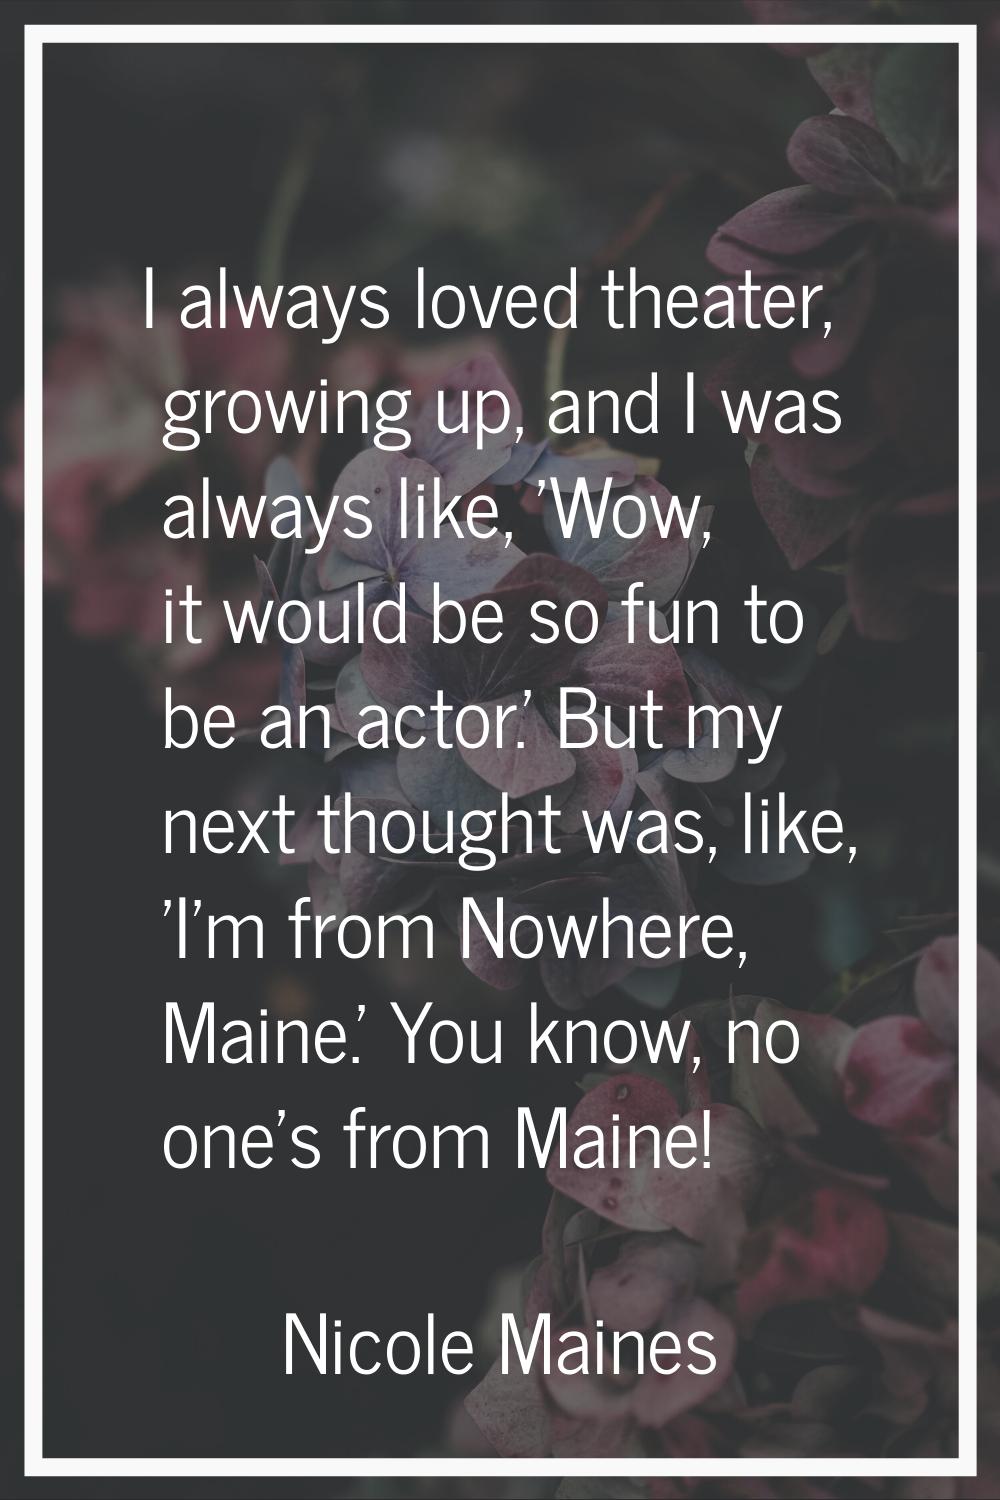 I always loved theater, growing up, and I was always like, 'Wow, it would be so fun to be an actor.